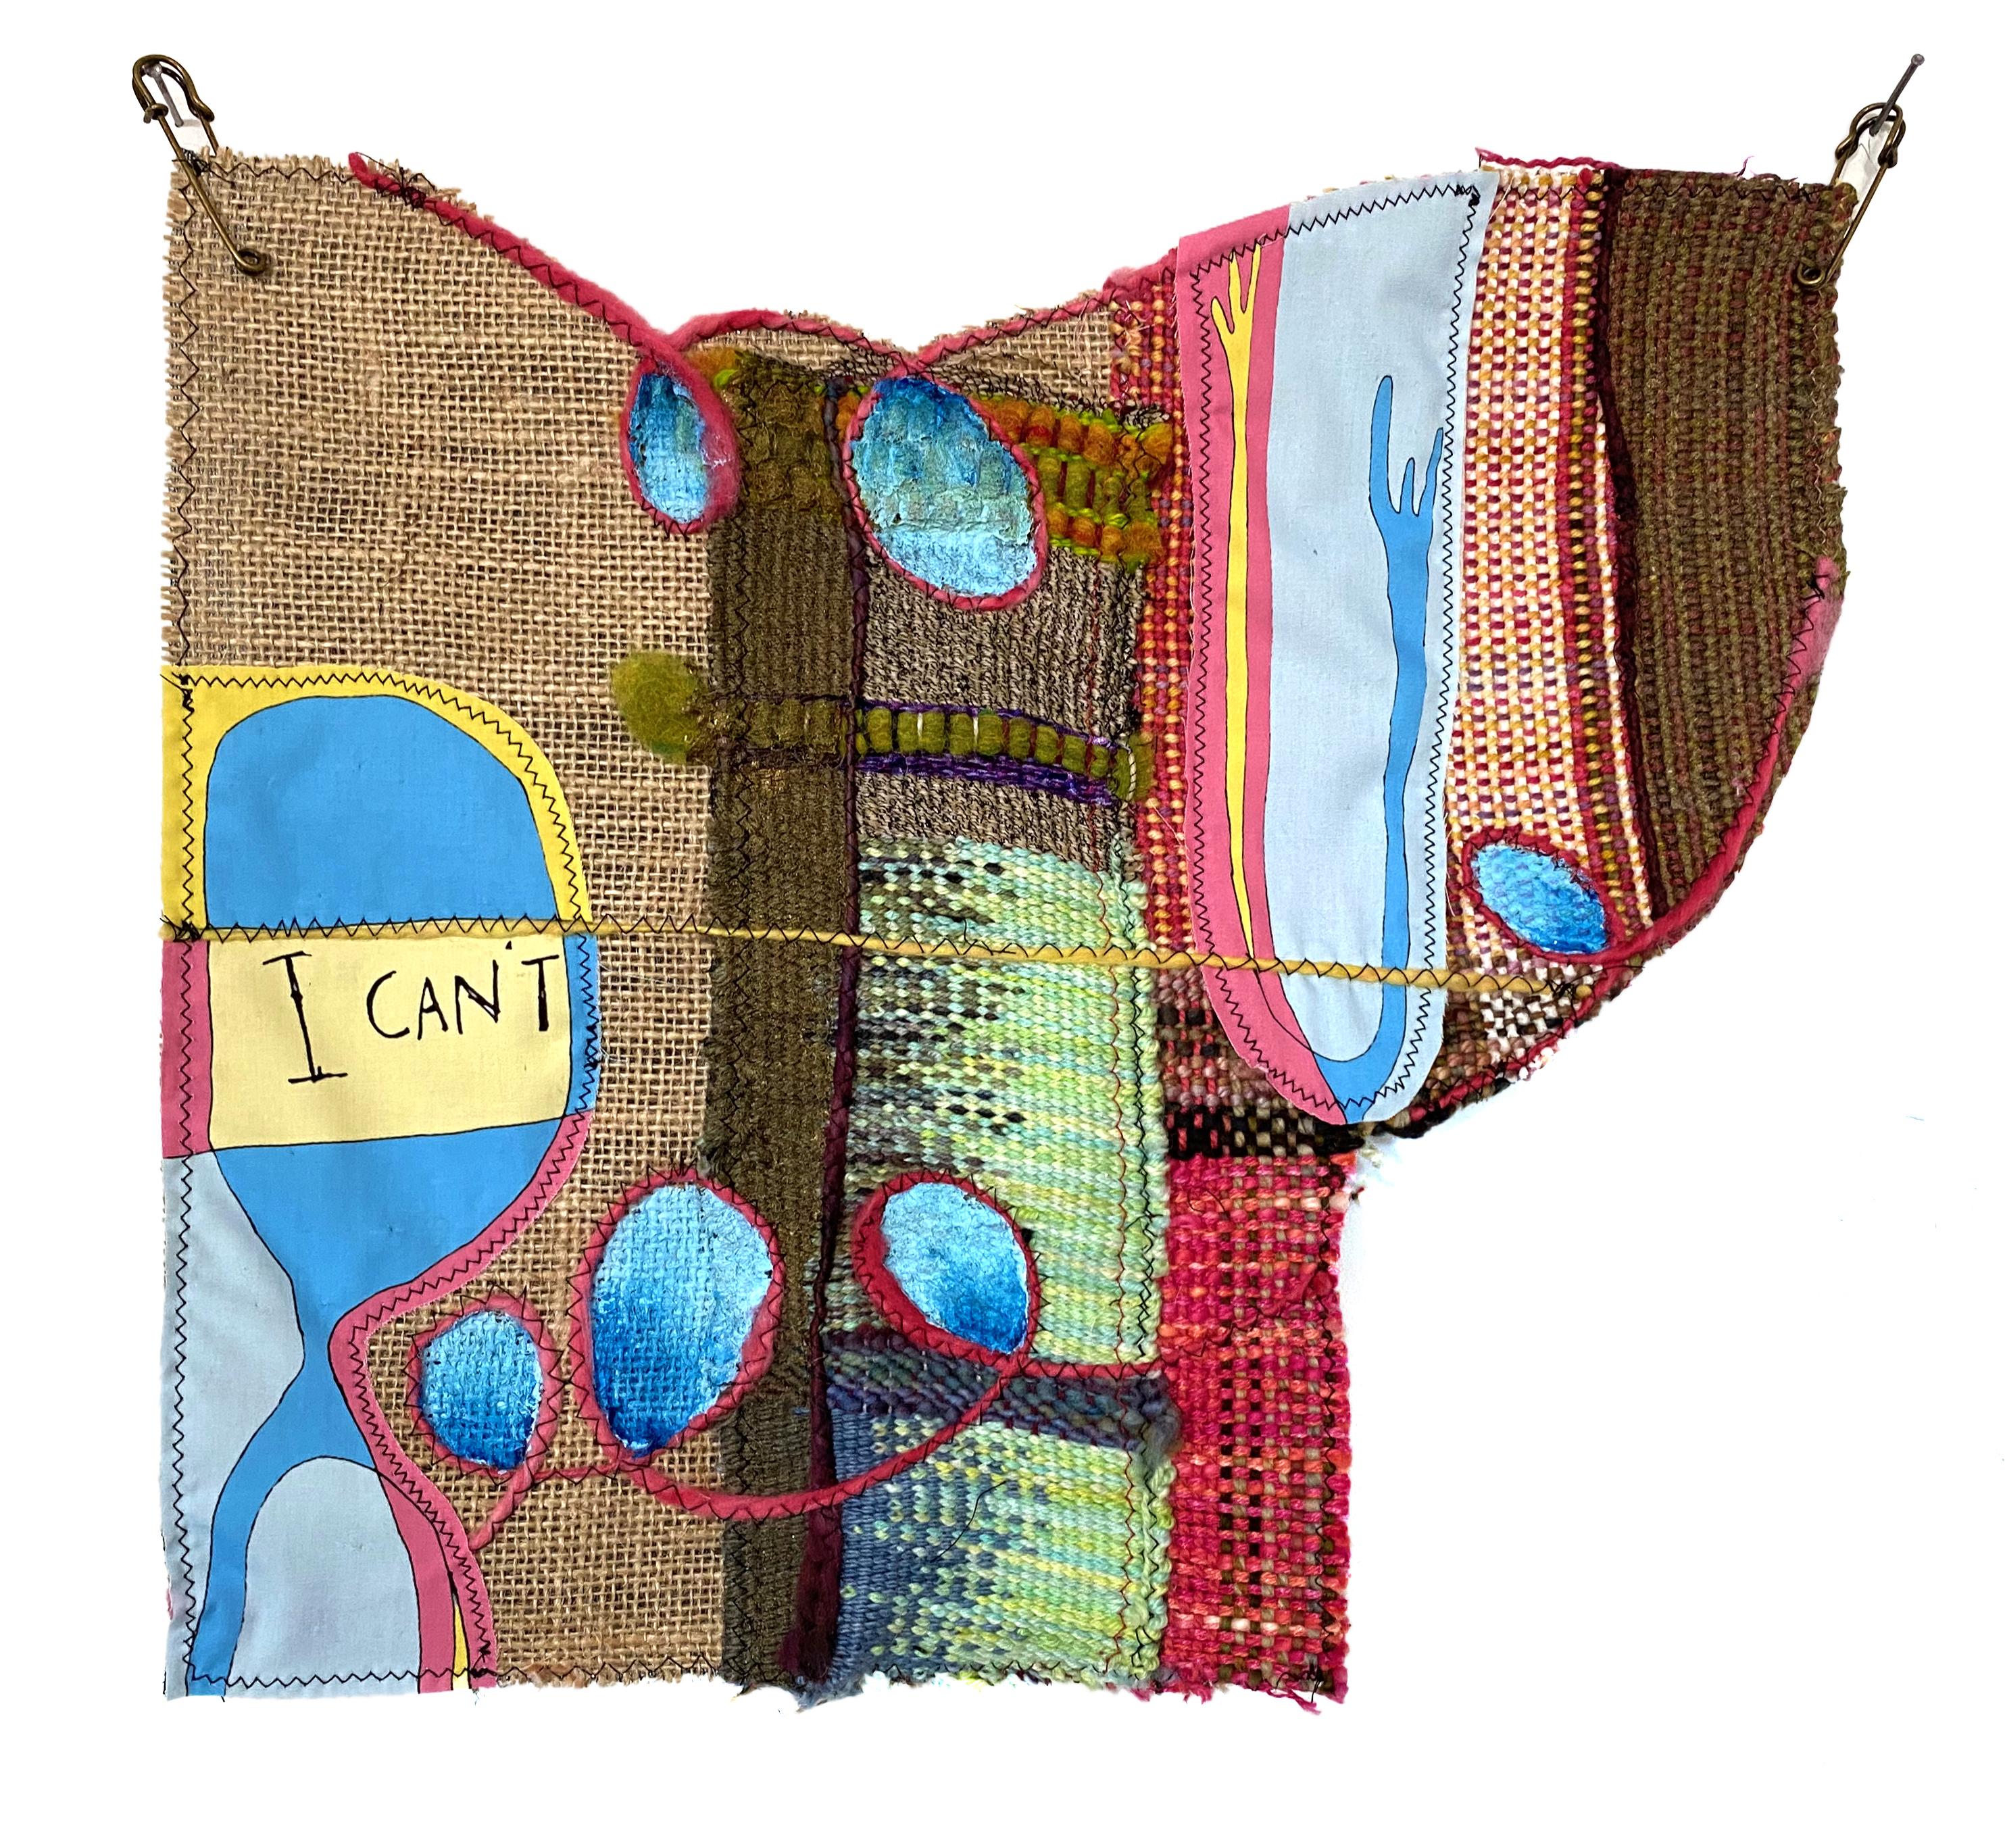 Juliet Martin Portrait Painting - Handwoven textile wall hanging: 'I Can't'